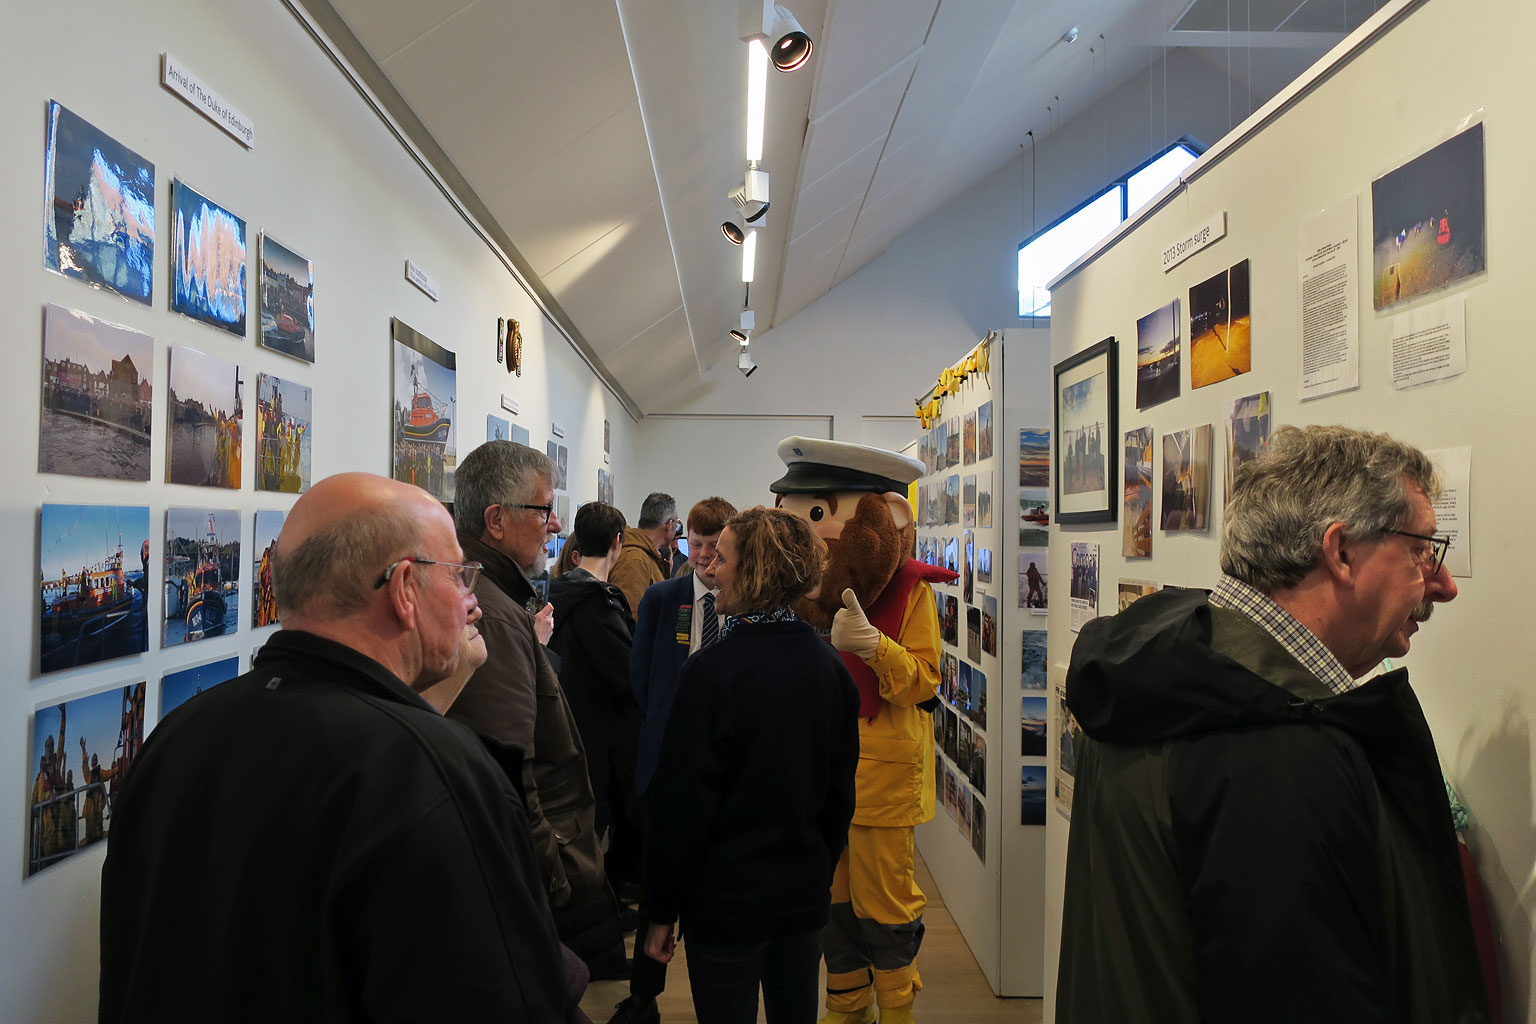 RNLI 200 exhibition at the Maltings